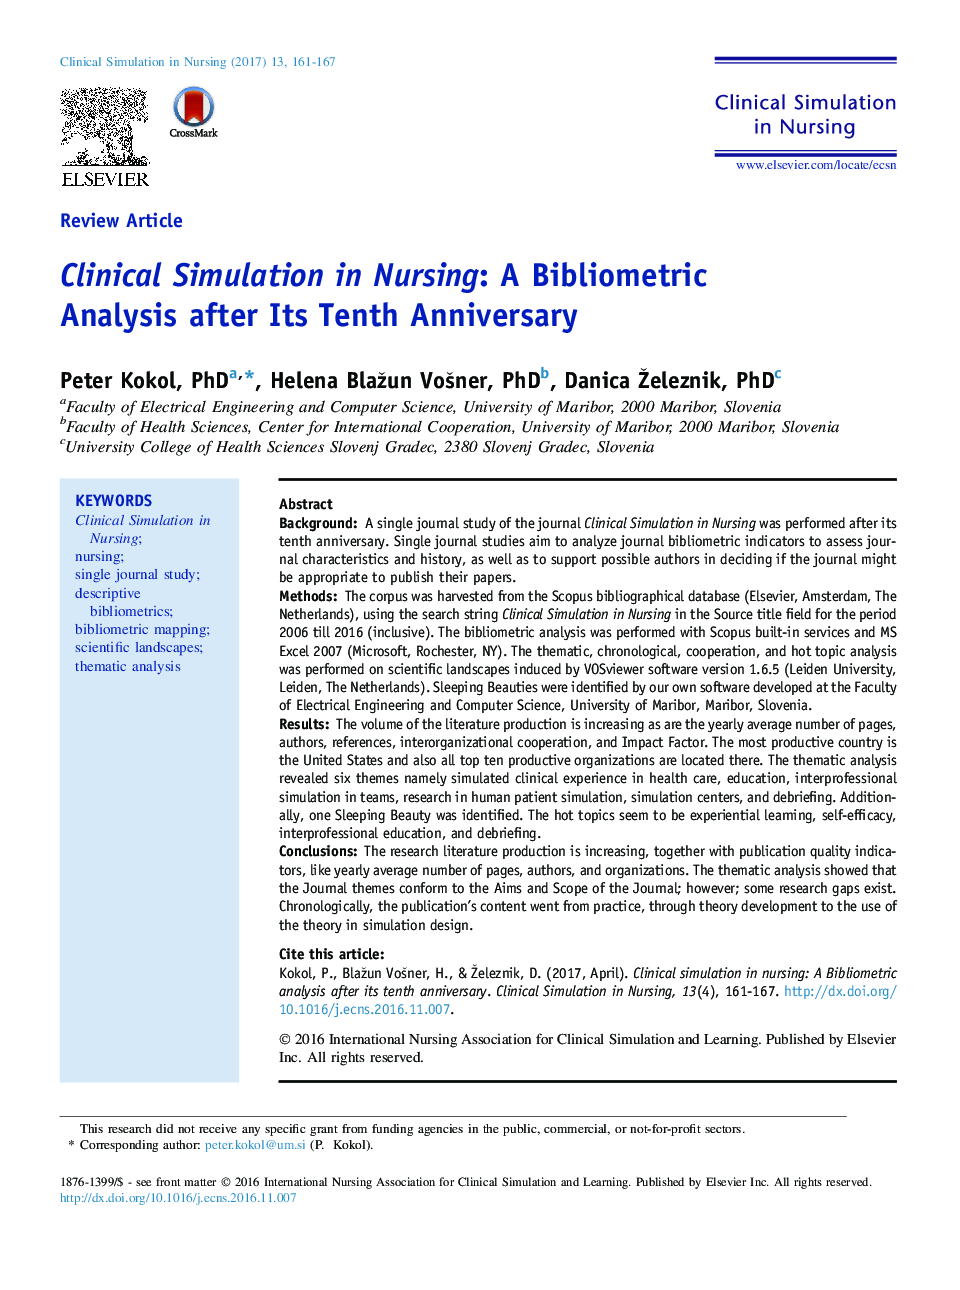 Clinical Simulation in Nursing: A Bibliometric Analysis after Its Tenth Anniversary